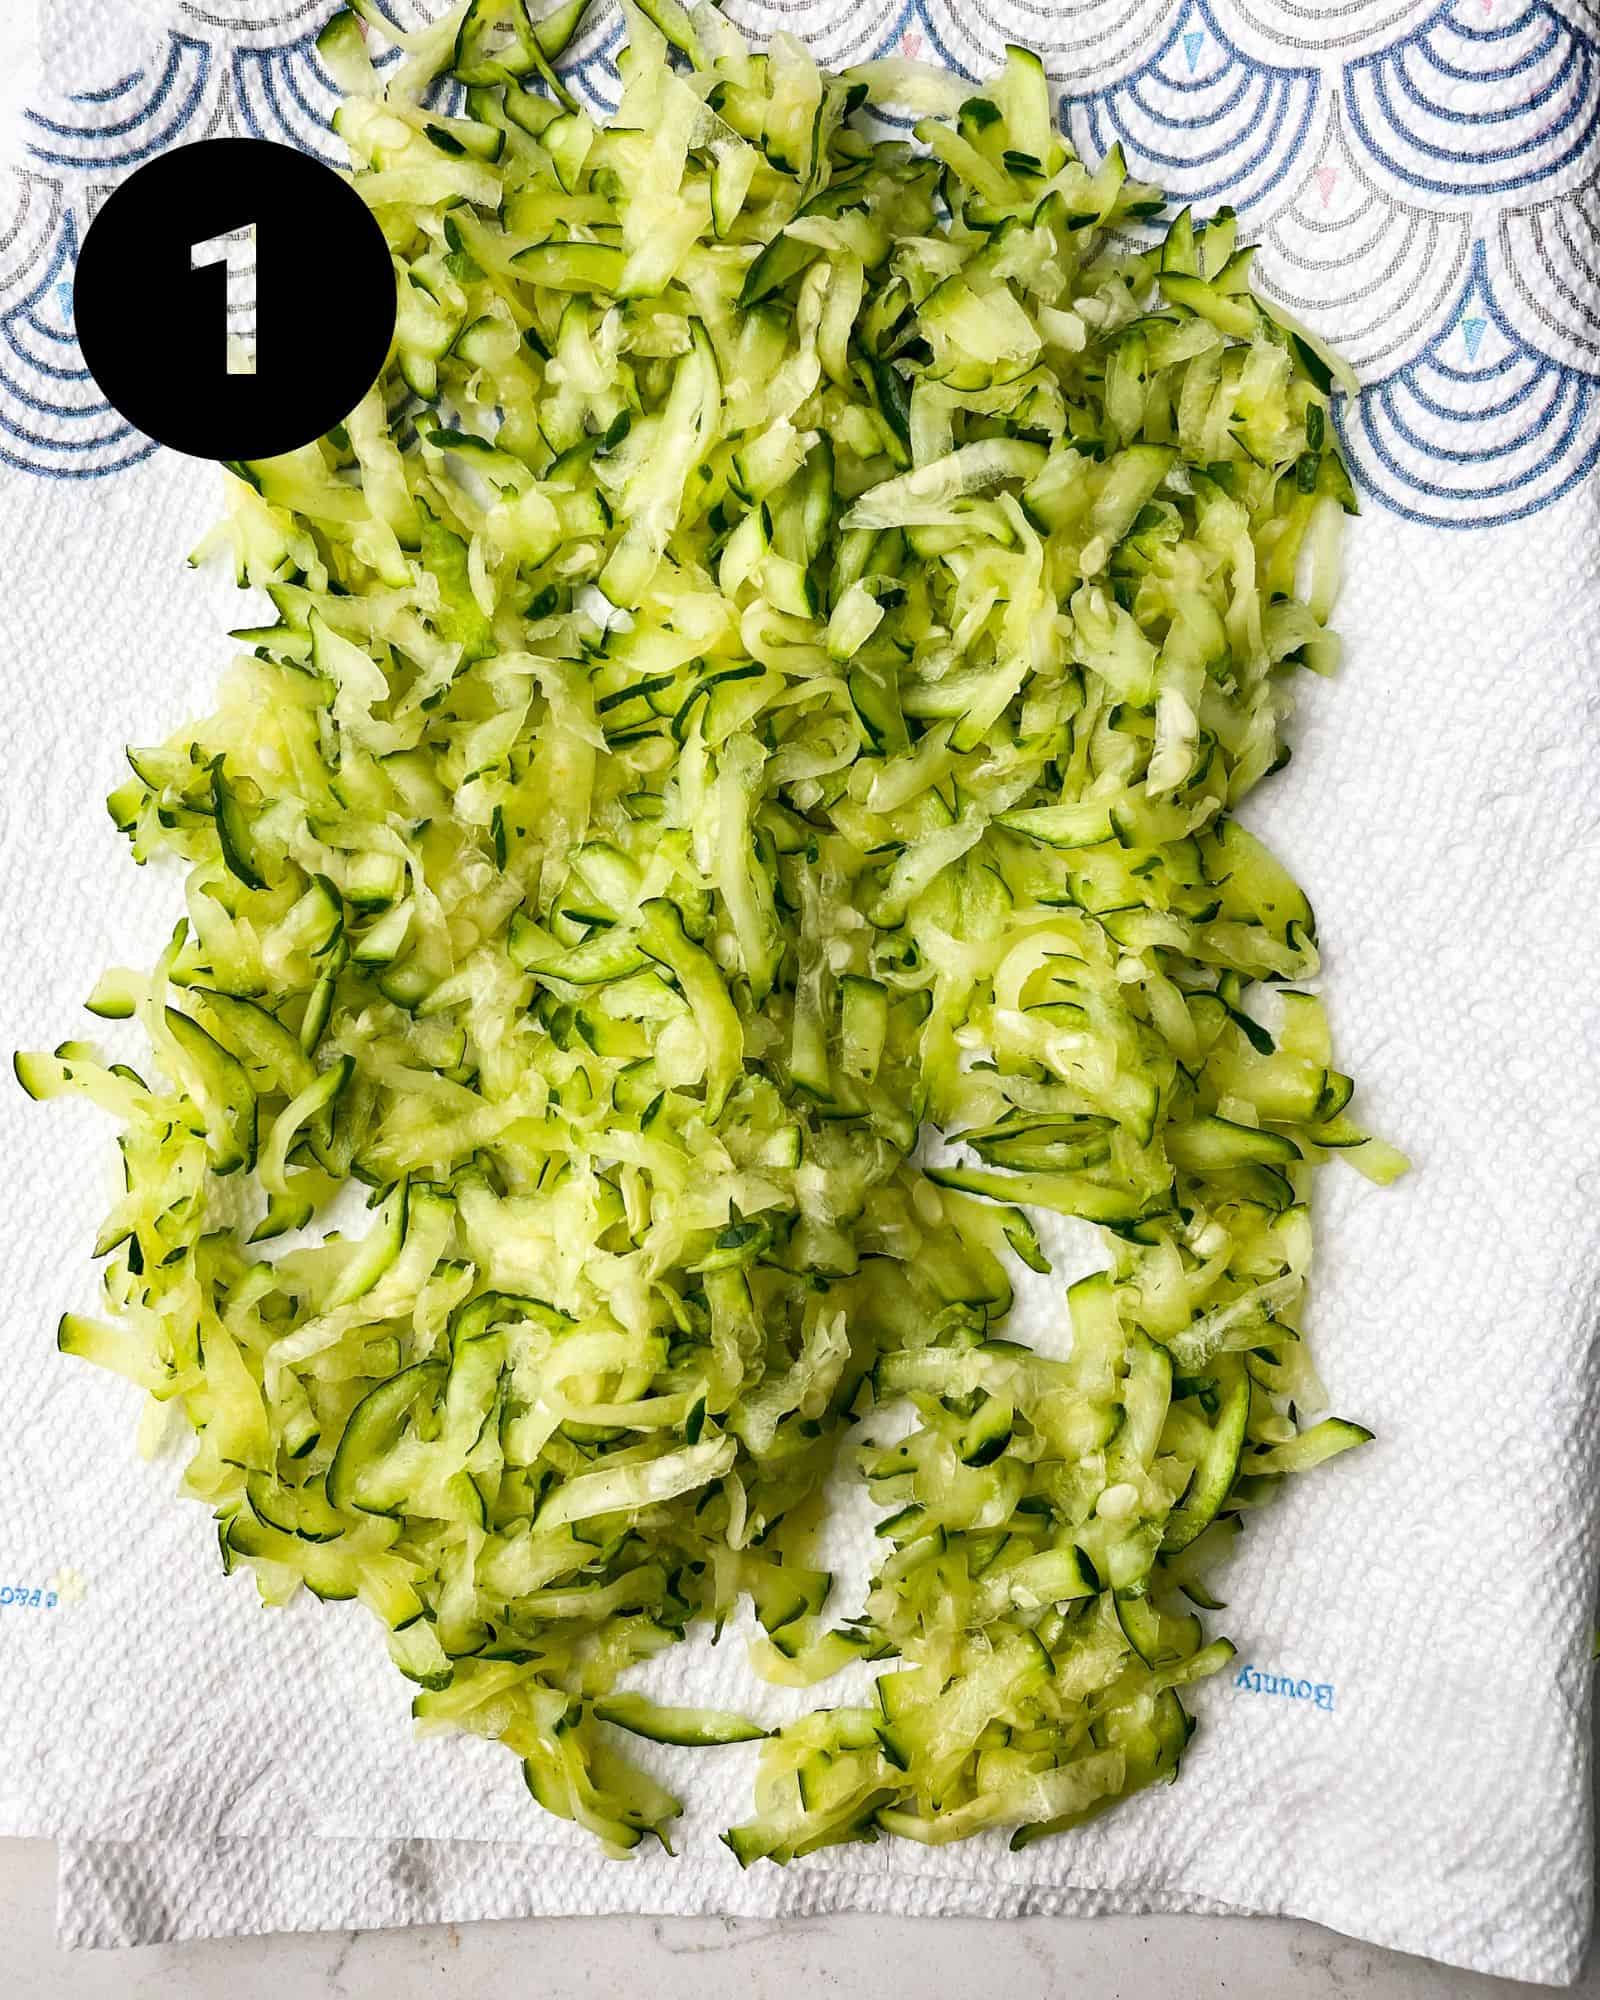 grated zucchini on a paper towel.